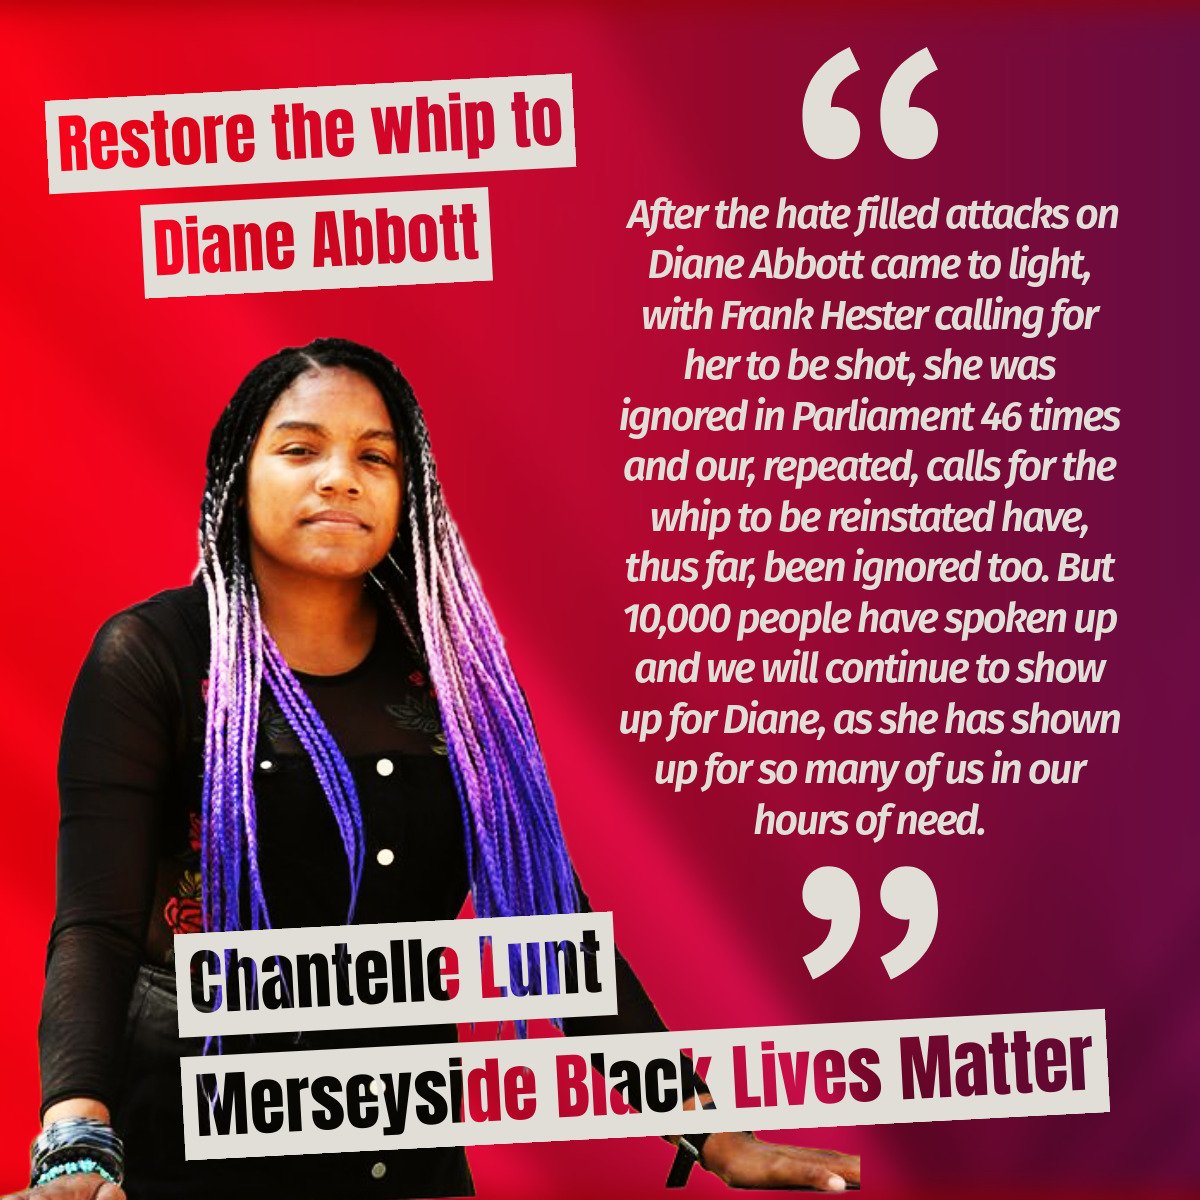 Campaigner with @MerseysideBLM  @ChantelleLunt on the racist targeting of fellow anti-austerity voice @HackneyAbbott, and the growing calls for the party leadership to #RestoreTheWhip- you can show your support by signing the petition here: actionnetwork.org/petitions/rest…